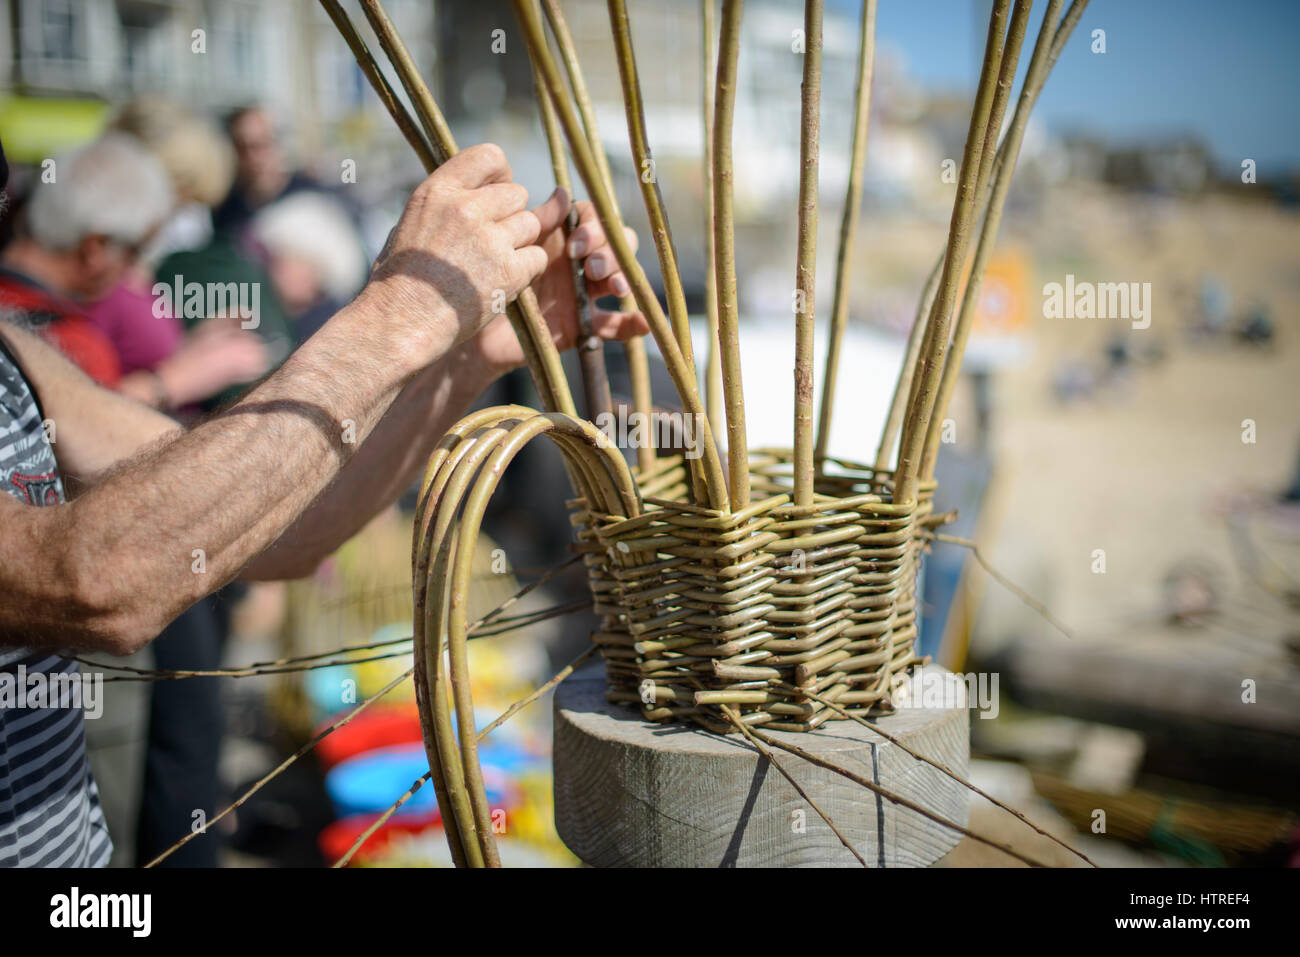 A man makes traditional cornish willow lobster pots called Withy Pots on the quayside of the harbour at St Ives, Cornwall, England, UK. Stock Photo